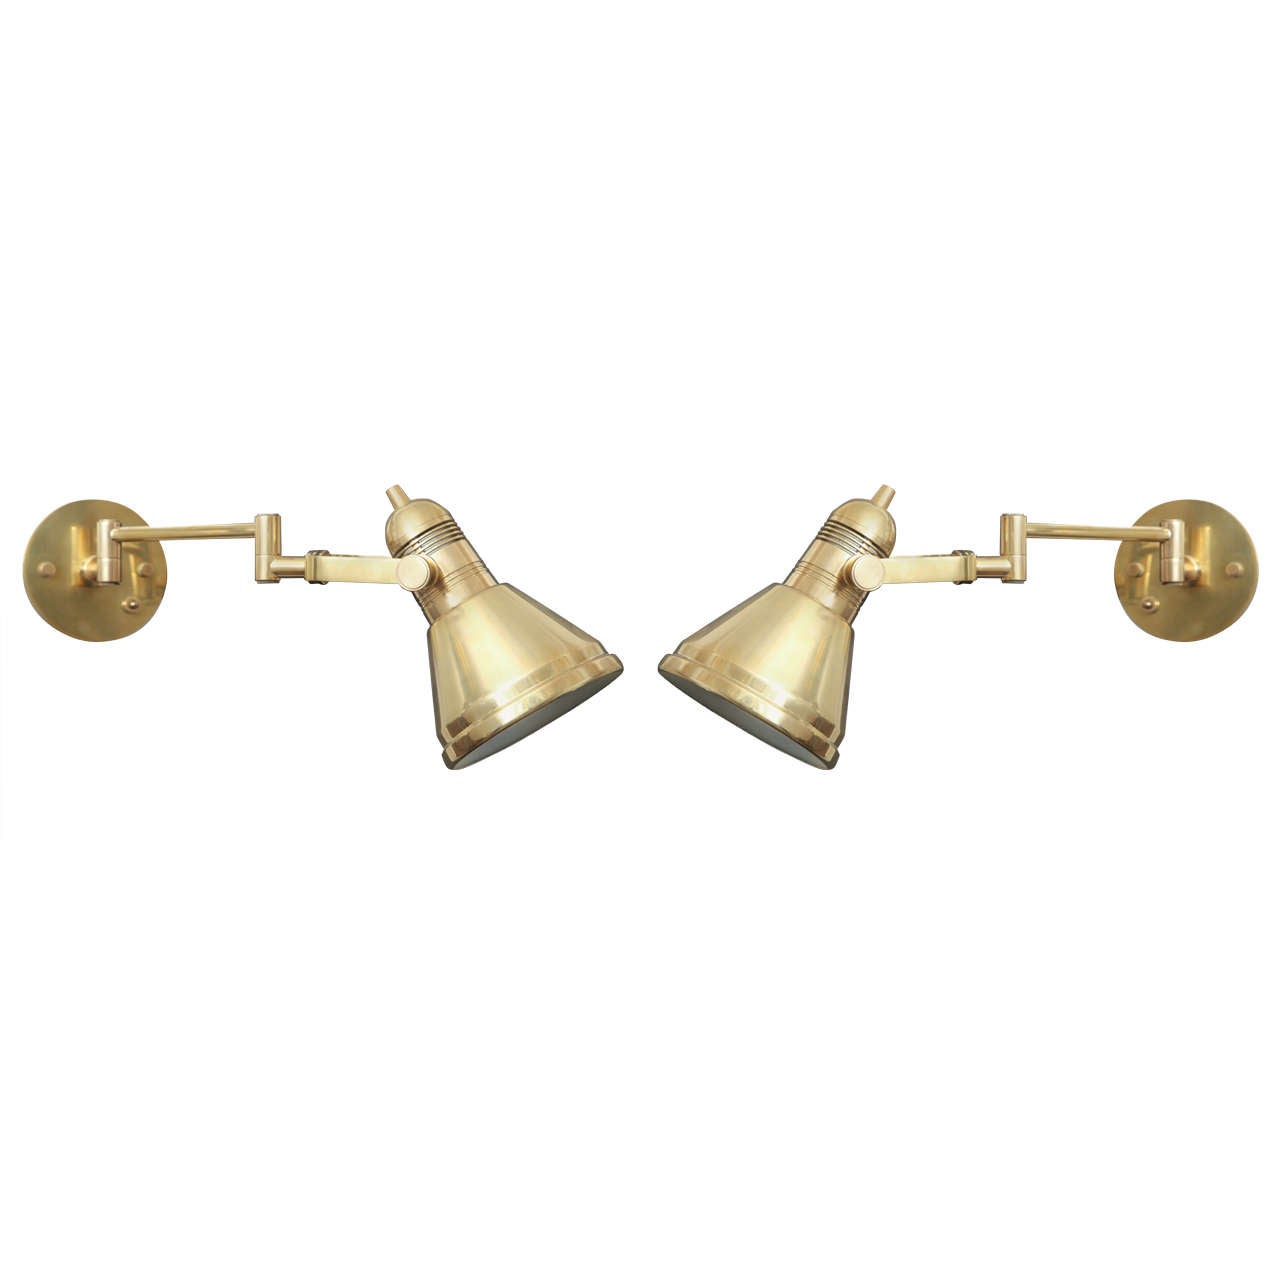 Pair of 1970s Articulated Wall Sconces by Nessen Studio